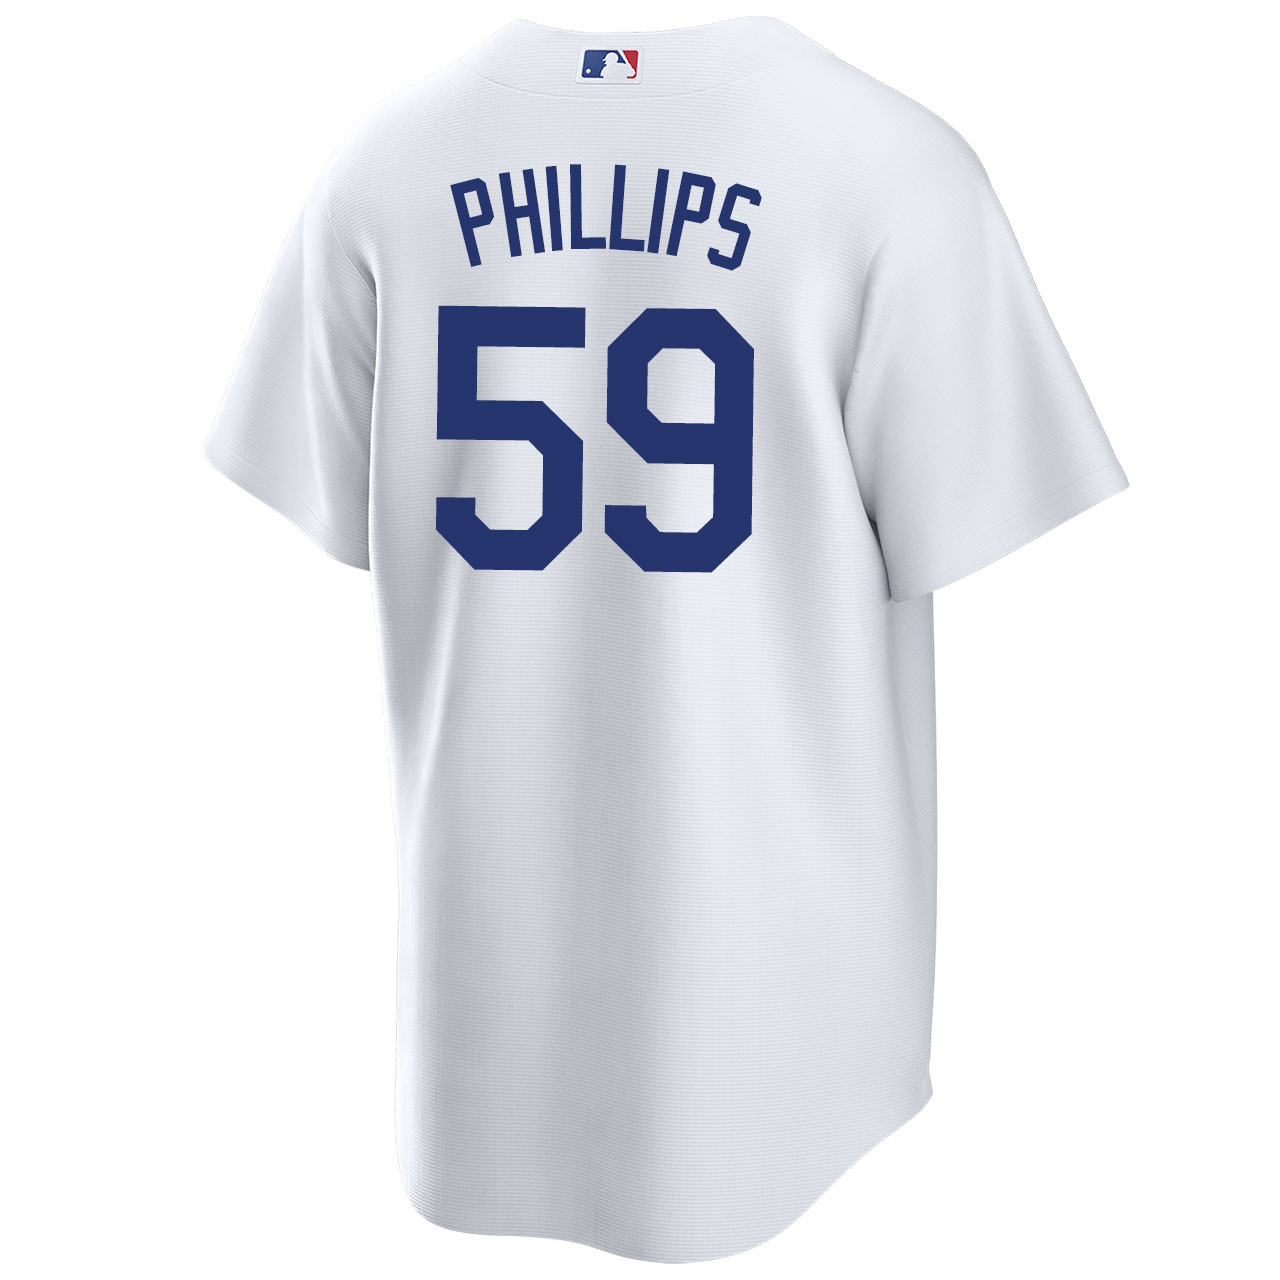 Evan Phillips Los Angeles Dodgers Home Jersey by NIKE